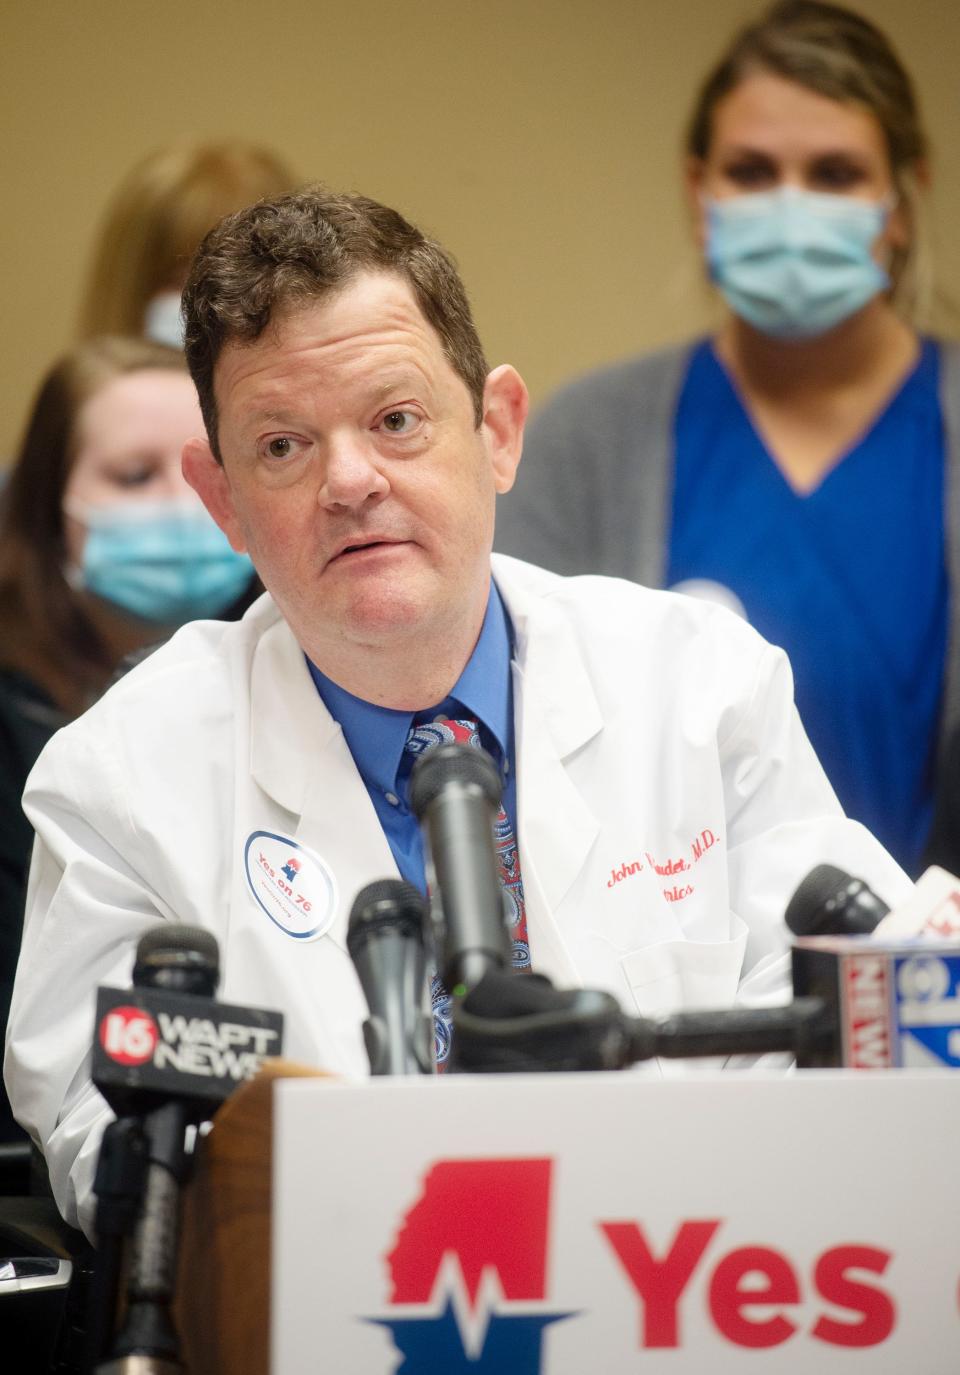 Dr. John W. Gaudet, a pediatrics specialist in Hattiesburg, speaks during a press conference about the launch of the Yes On 76 campaign at the Mississippi Hospital Association in Madison, Tuesday, May 11, 2021. Senate Medicaid Chair Kevin Blackwell is now planning to bring forward the House's version of Medicaid expansion, but he will replace key language in the bill with his own version.